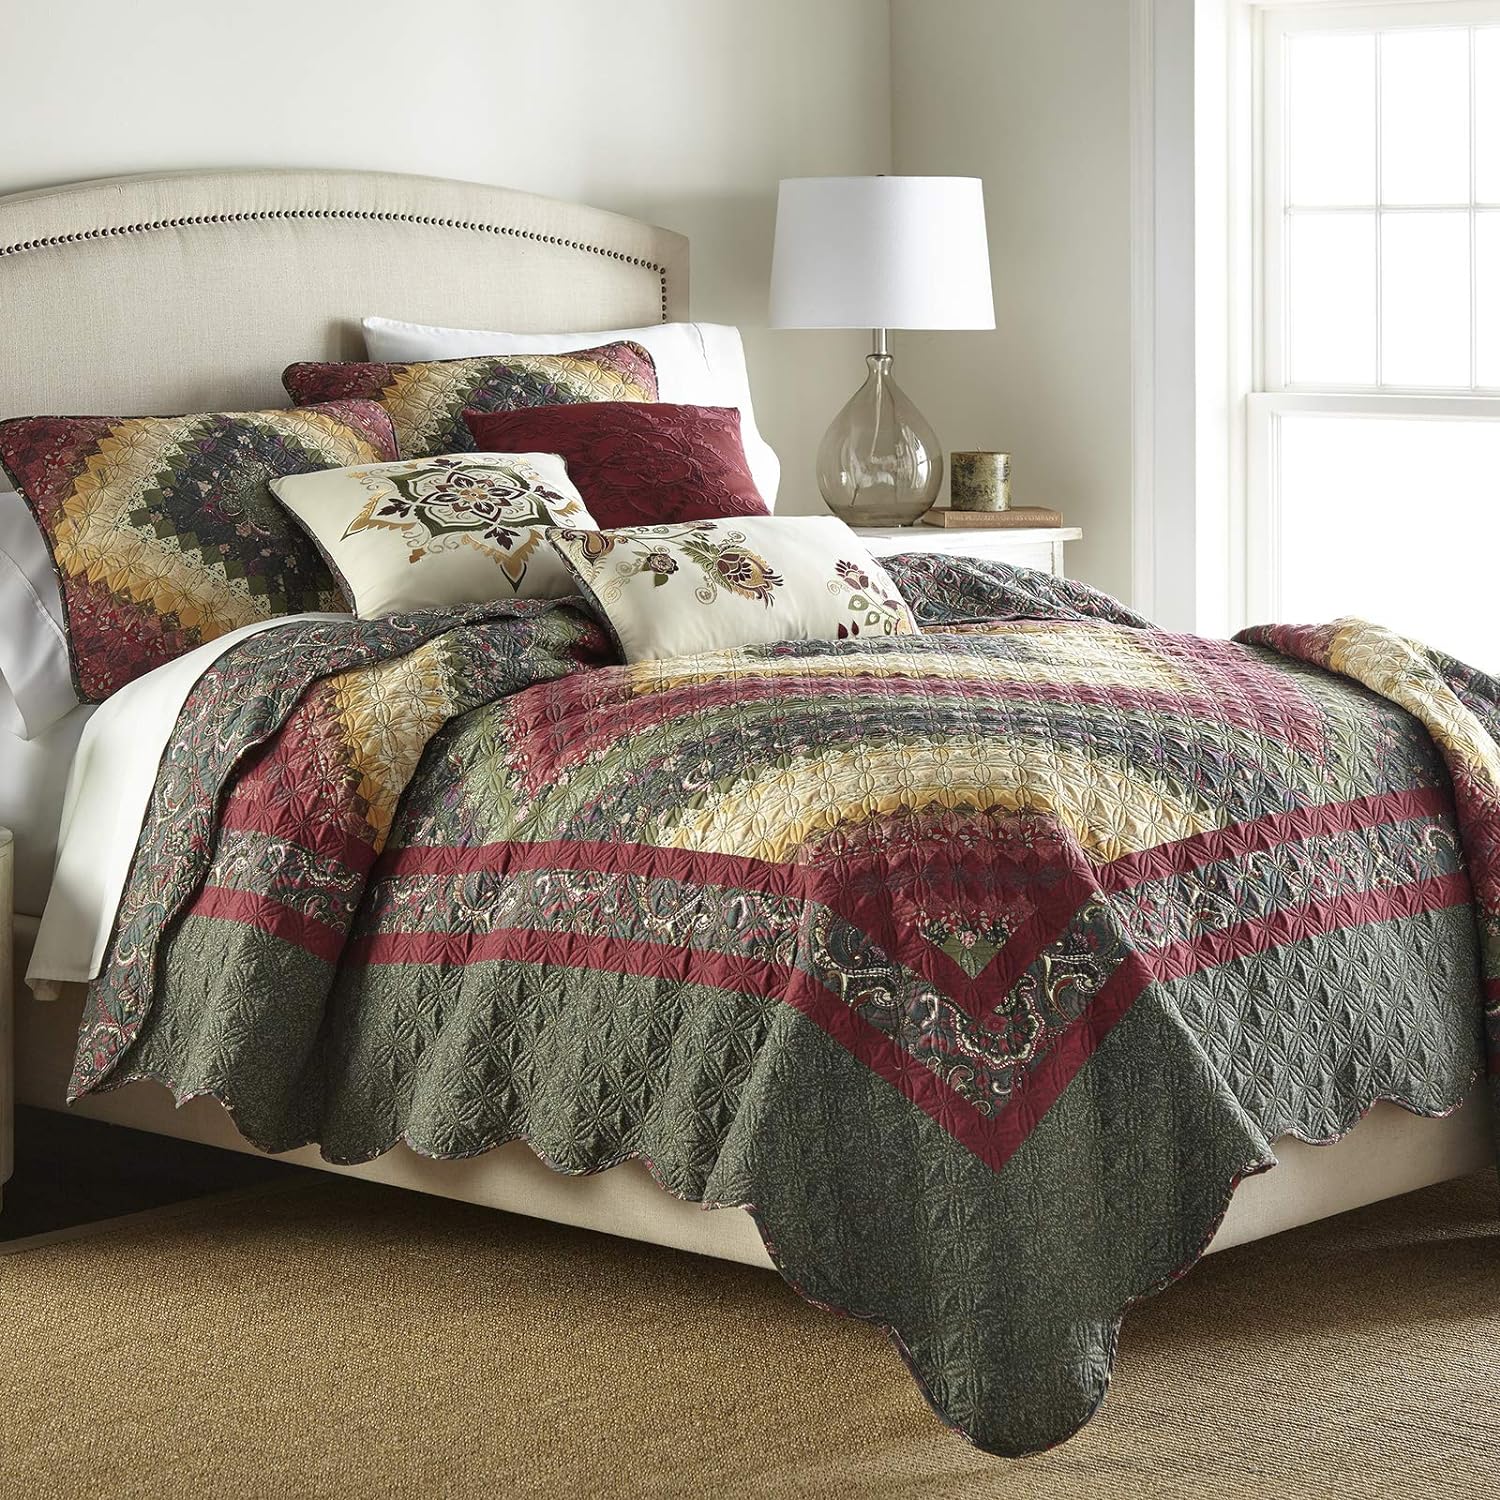 Donna Sharp Contemporary Quilt Bedding Set: A Perfect Addition to Your Rustic Decor